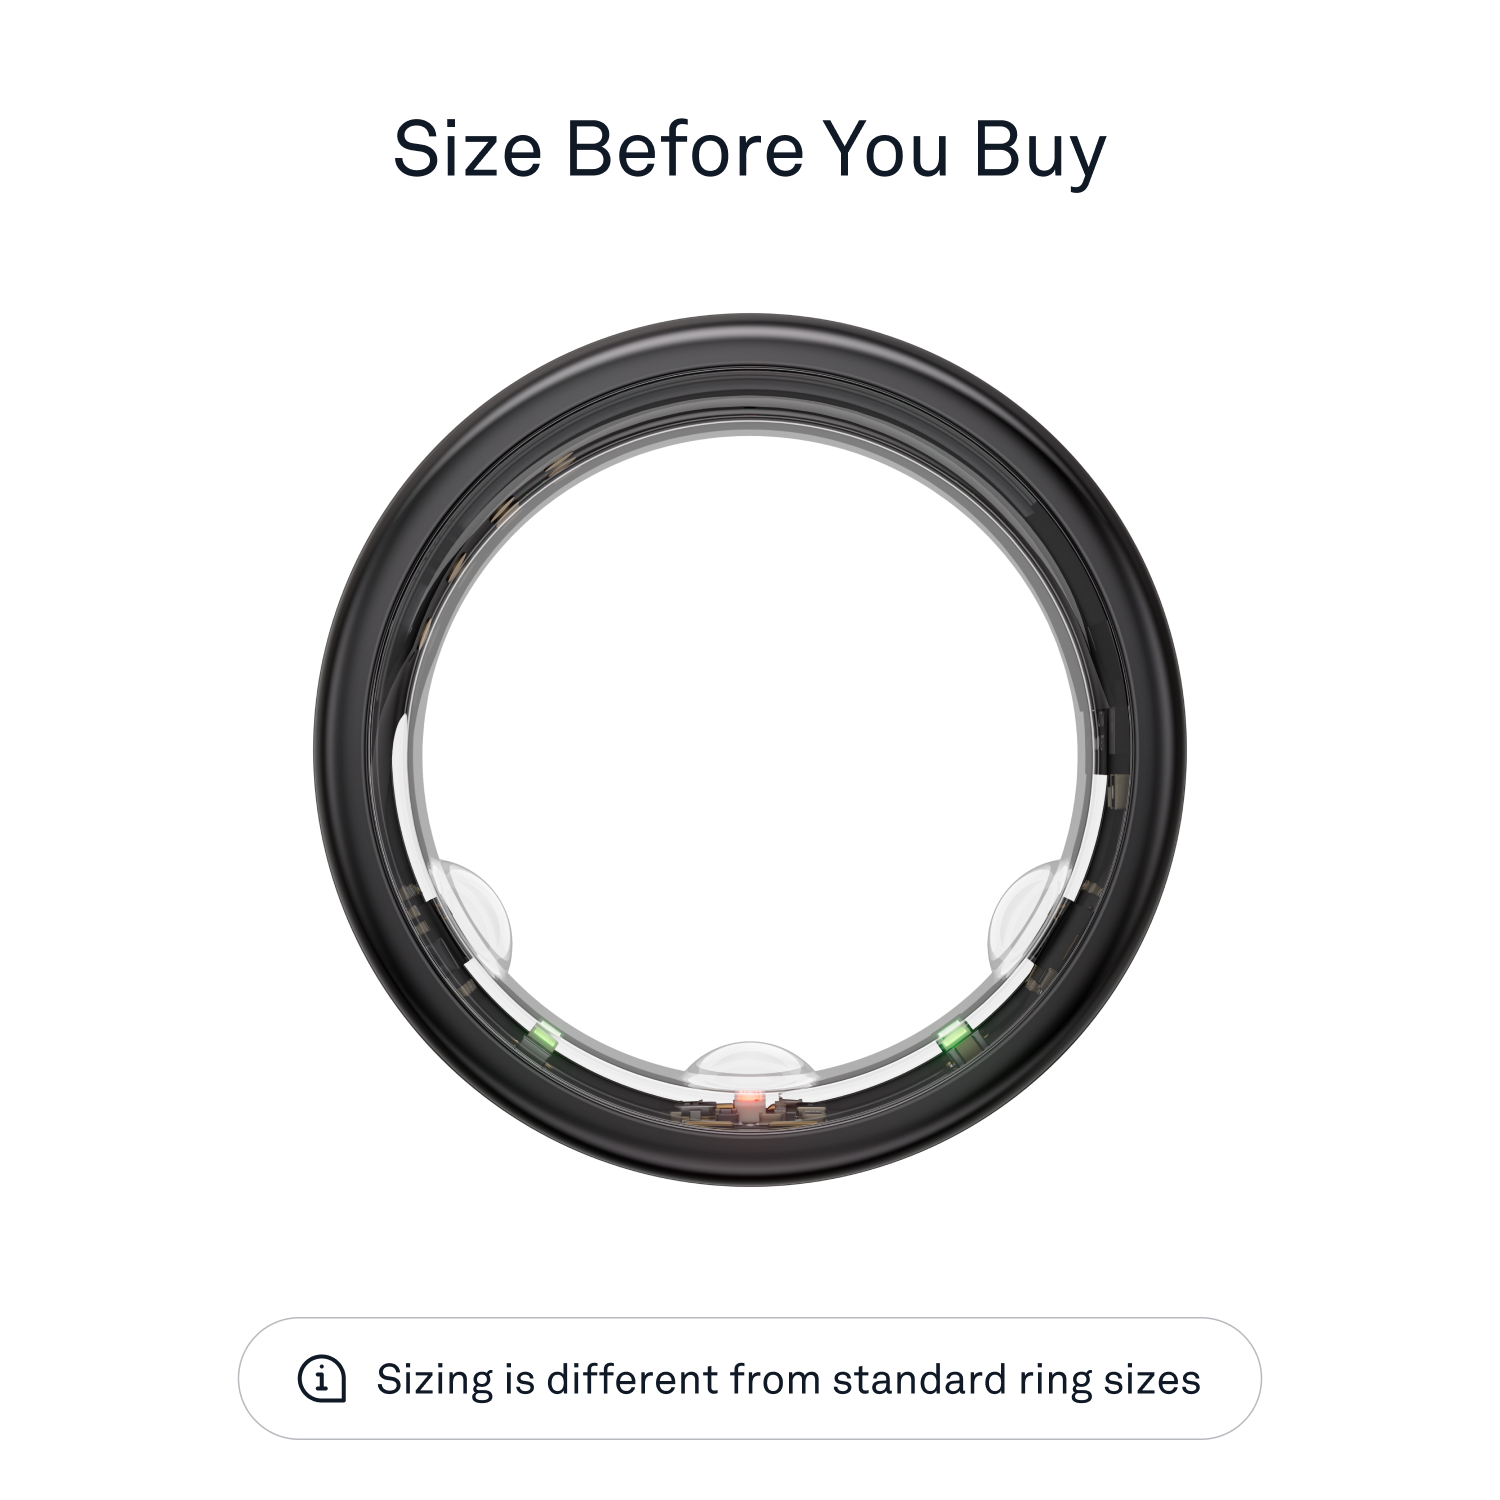 Oura Ring Gen3 Horizon Size Before You Buy Size 7 Black JZ90-51382-07 -  Best Buy